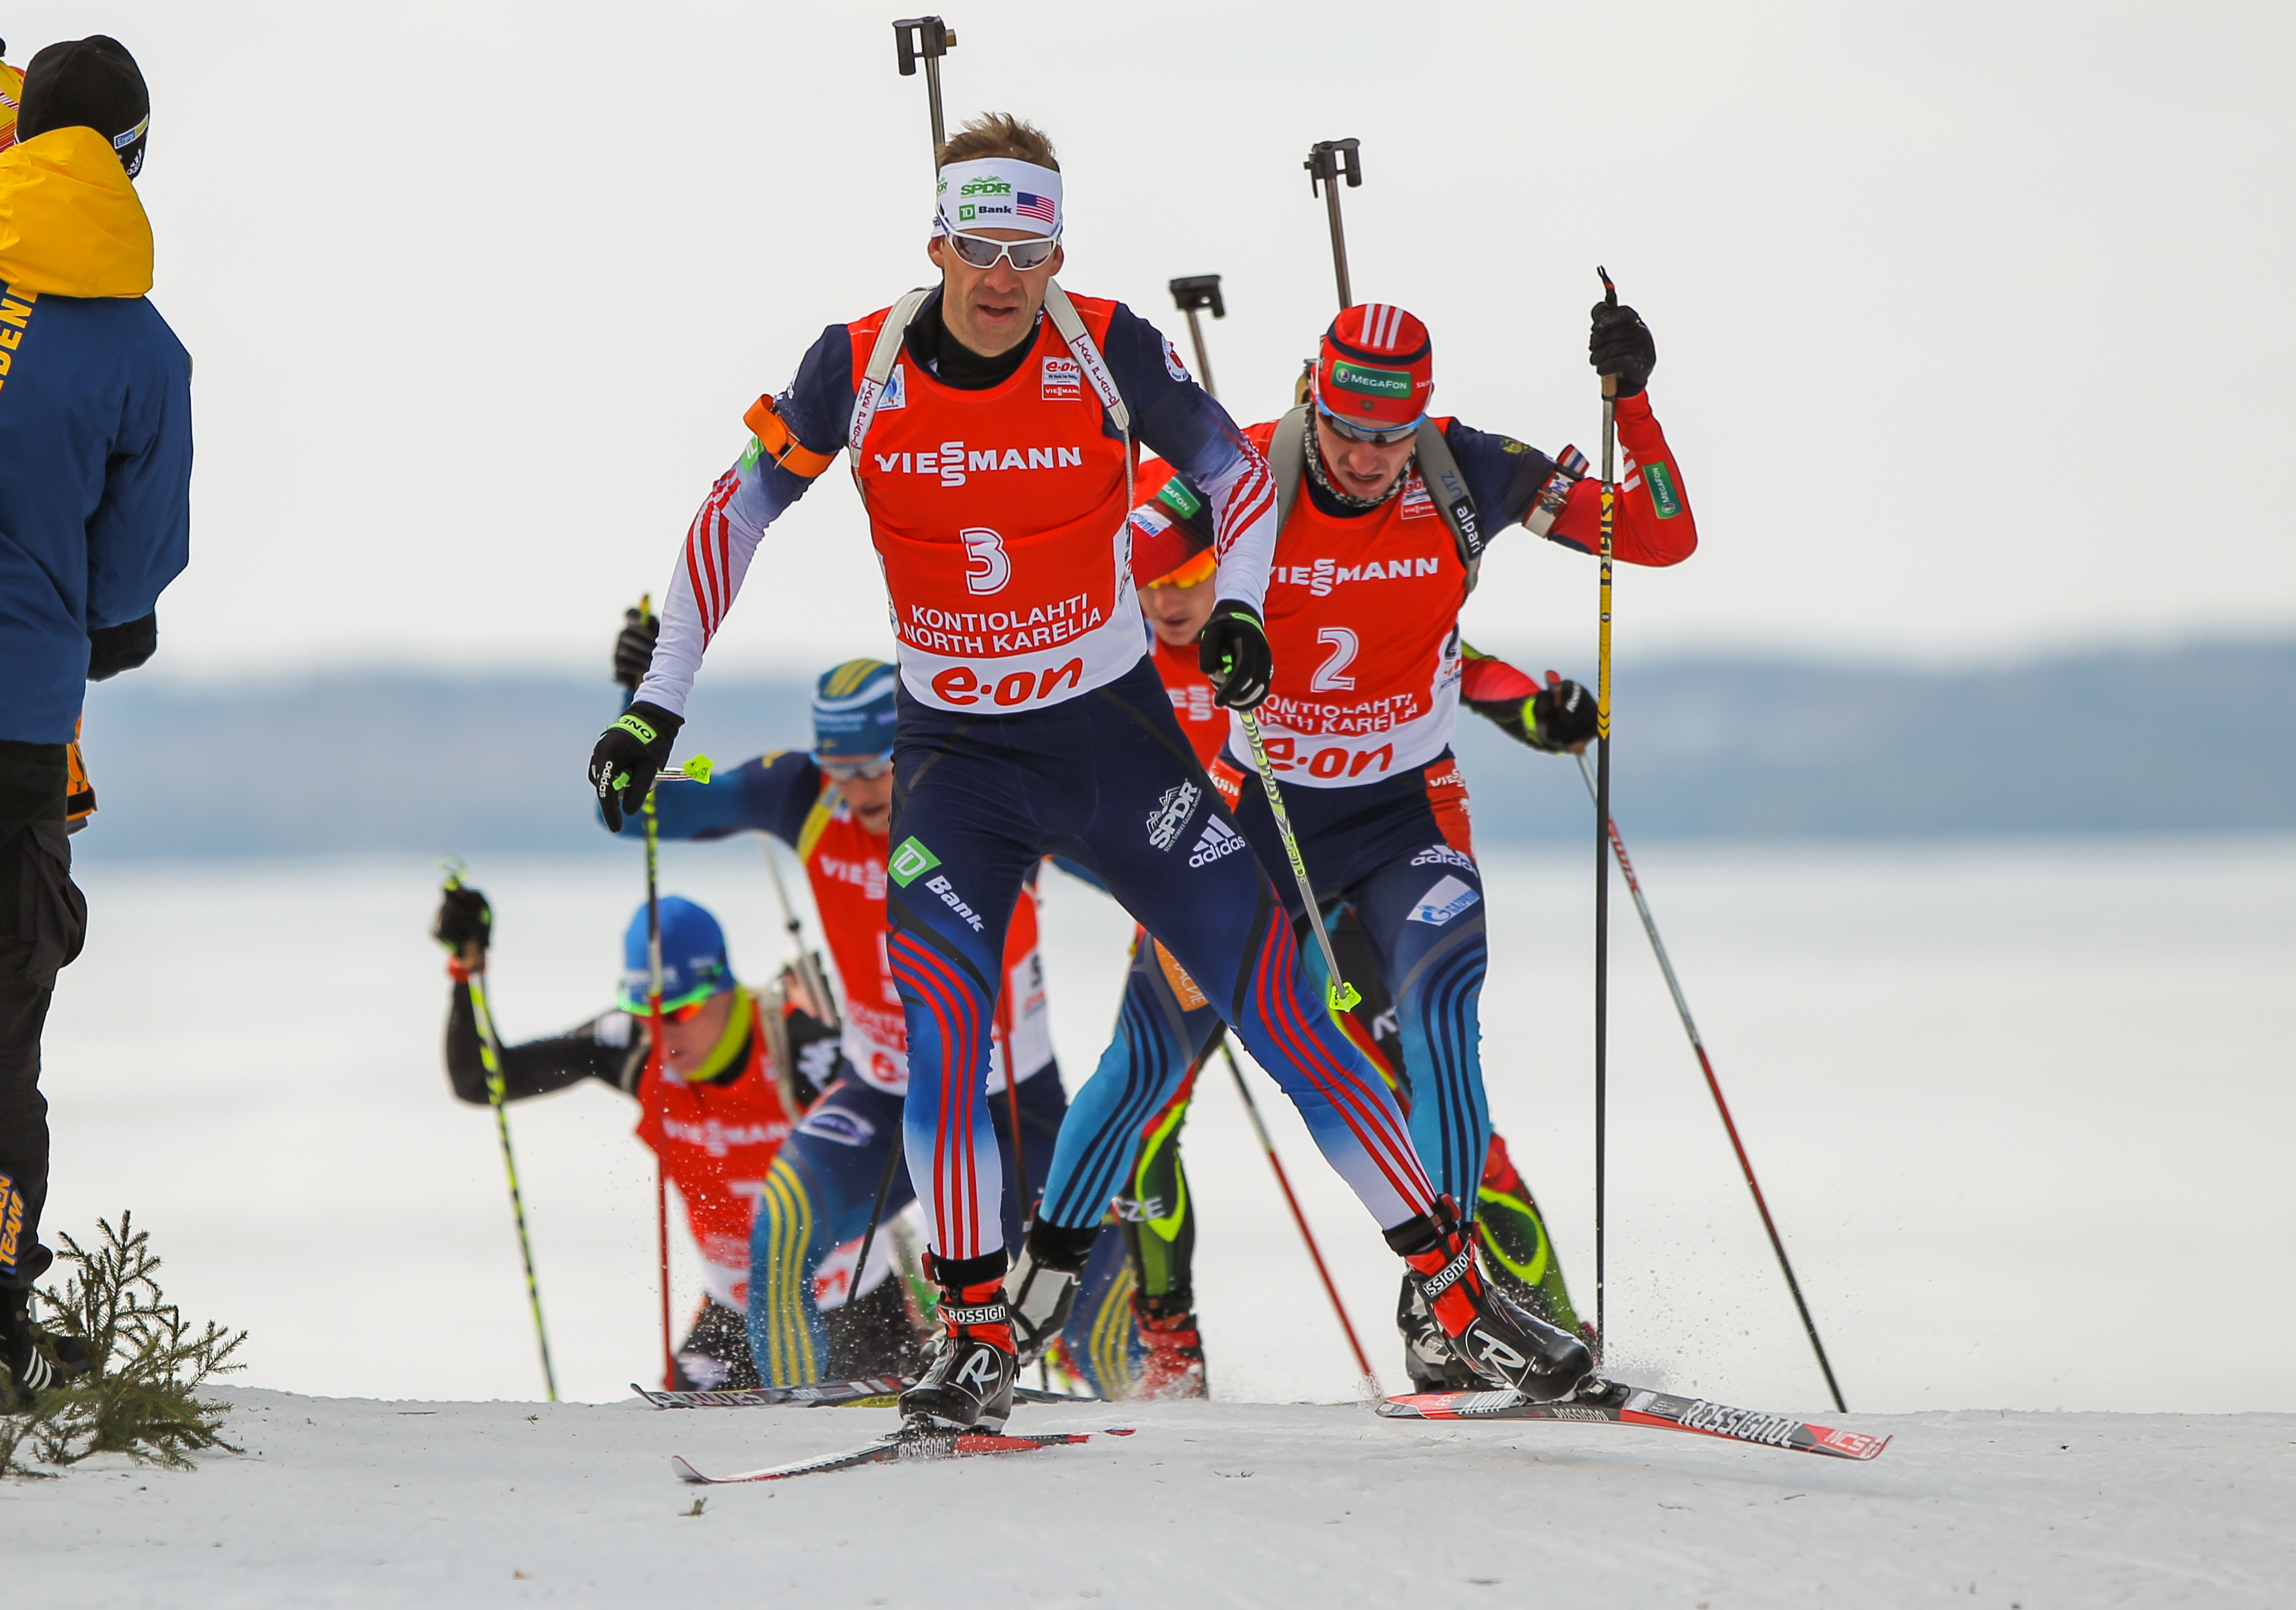 Lowell Bailey (USA) leading a train of skiers in today's World Cup pursuit in Kontiolahti, Finland. Photo: USBA/NordicFocus.